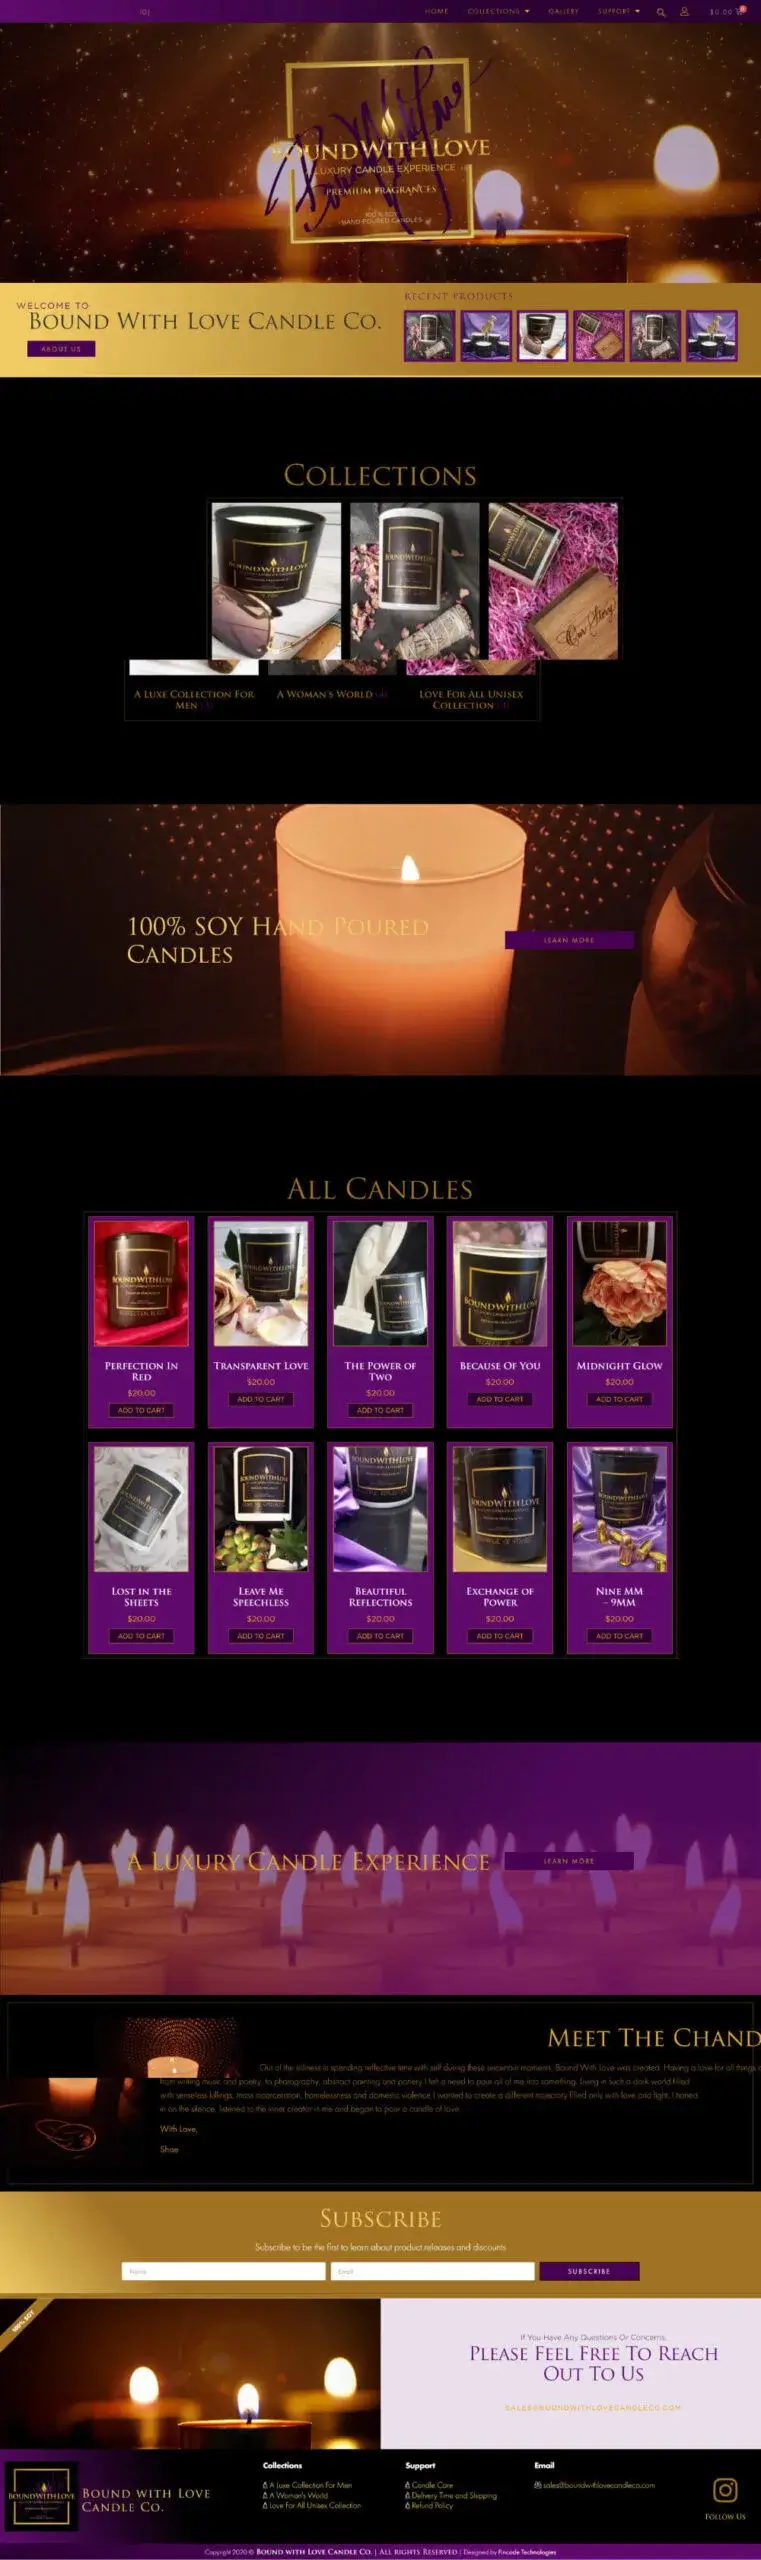 Boundwithlove-Candle-Website-Design-Home